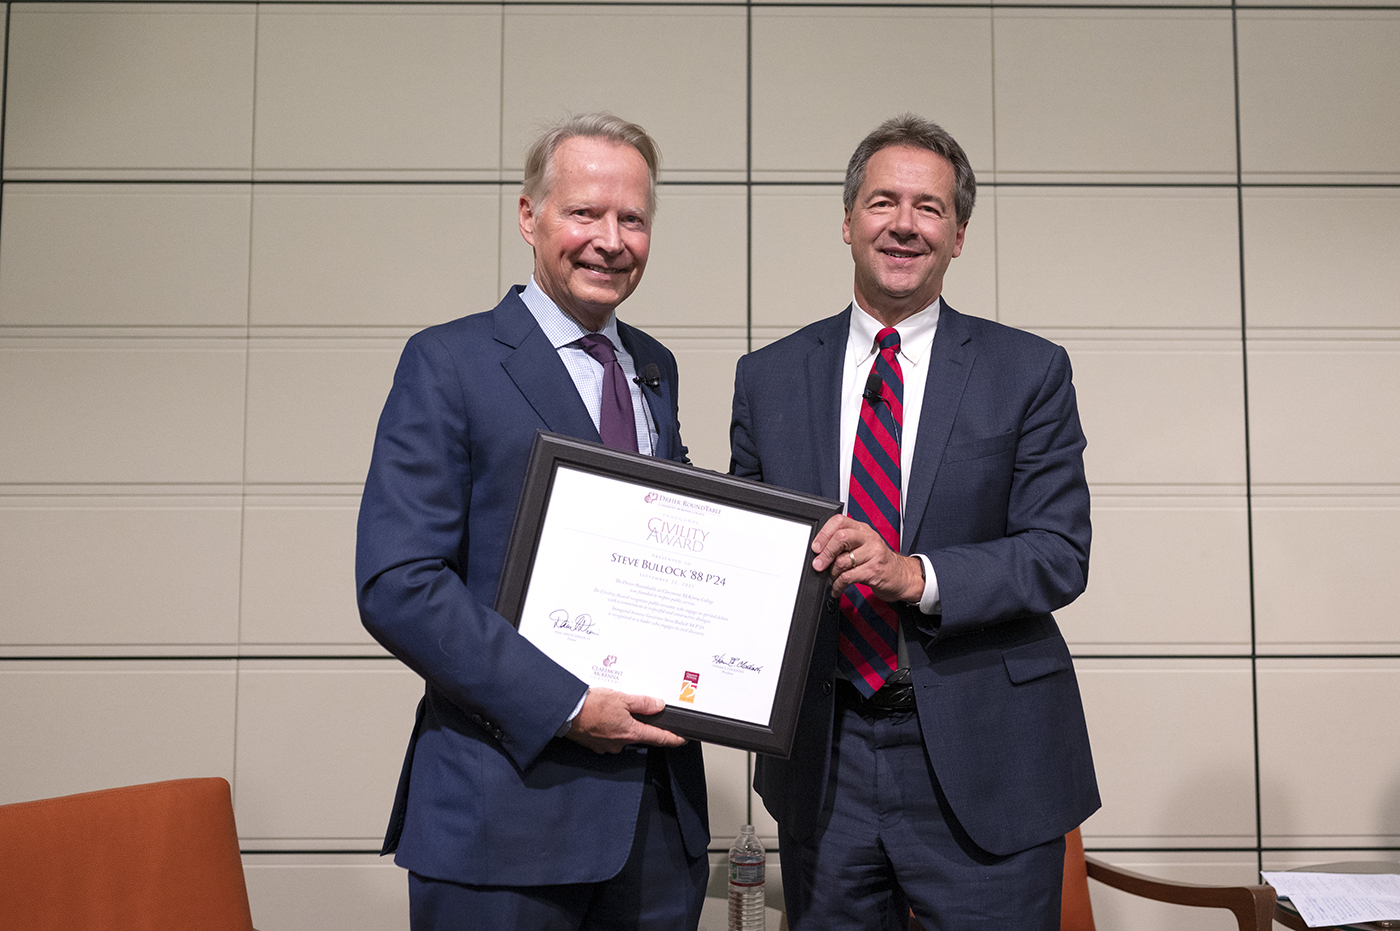 Steve Bullock '88 P'24 (left) is presented the inaugural Civility Award by David Dreier '75 (right) on the Athenaeum stage